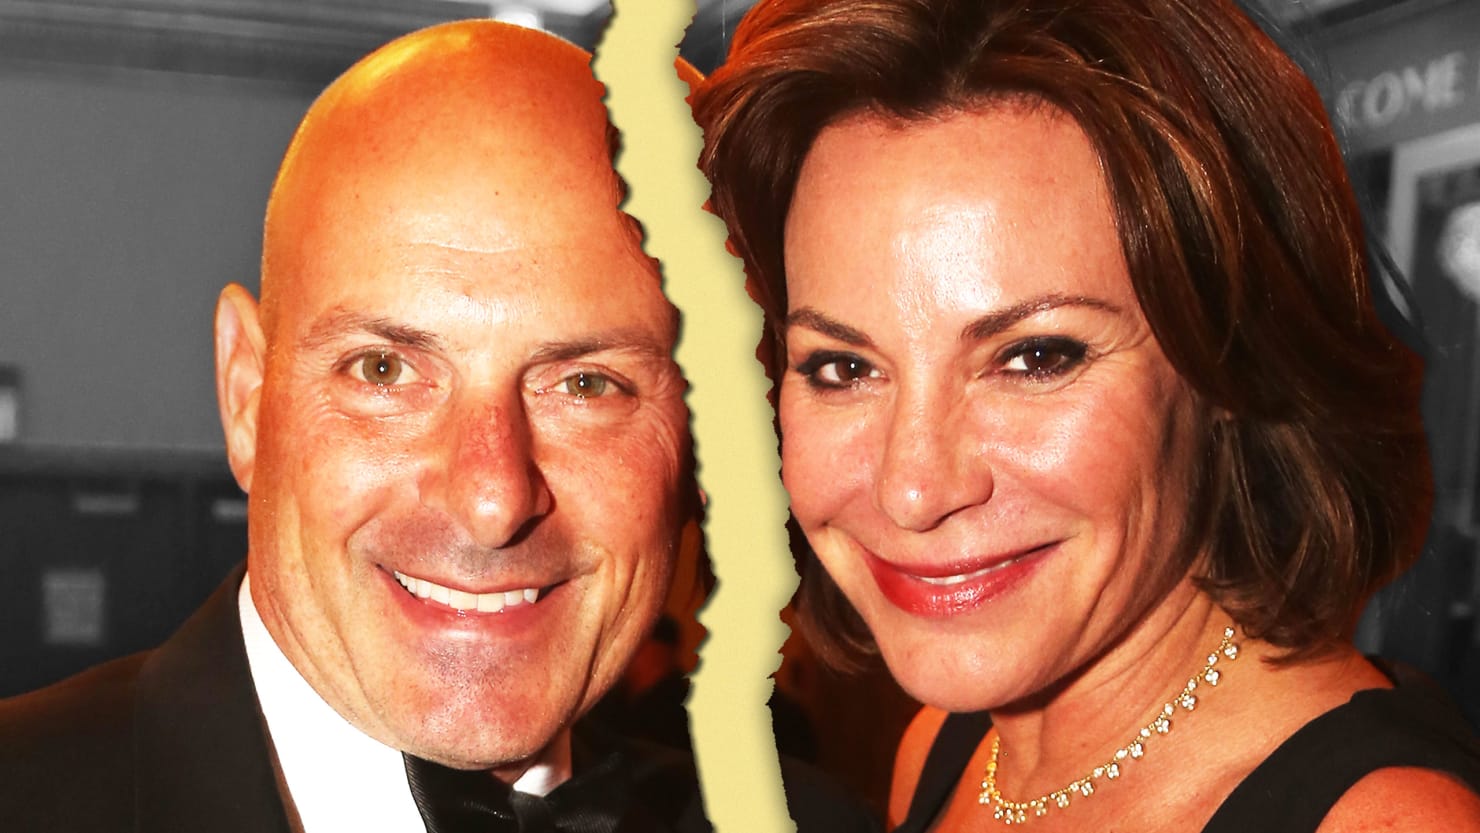 Luann and Tom The Death of a Real Housewifes Marriage